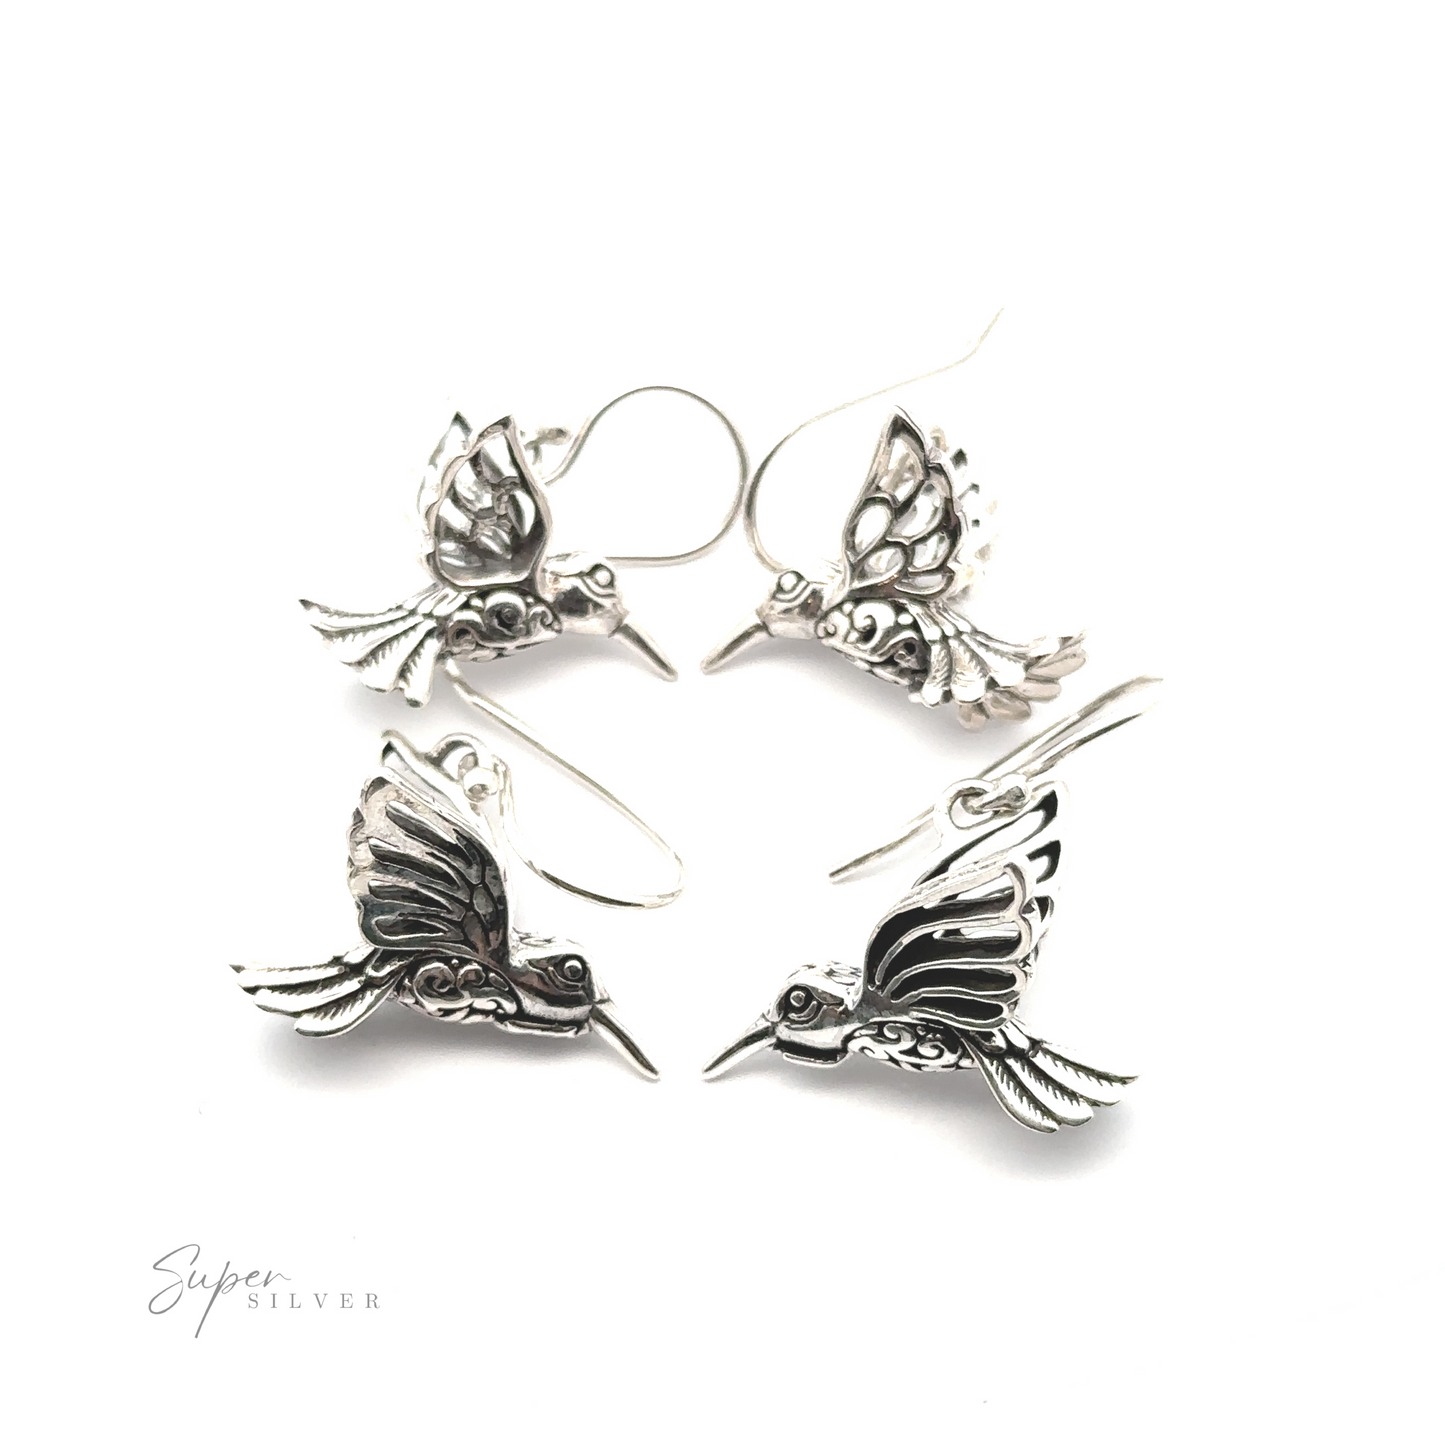 Four Filigree Hummingbird Earrings, adorned with delicate filigree details, are arranged in a circular pattern on a white background.